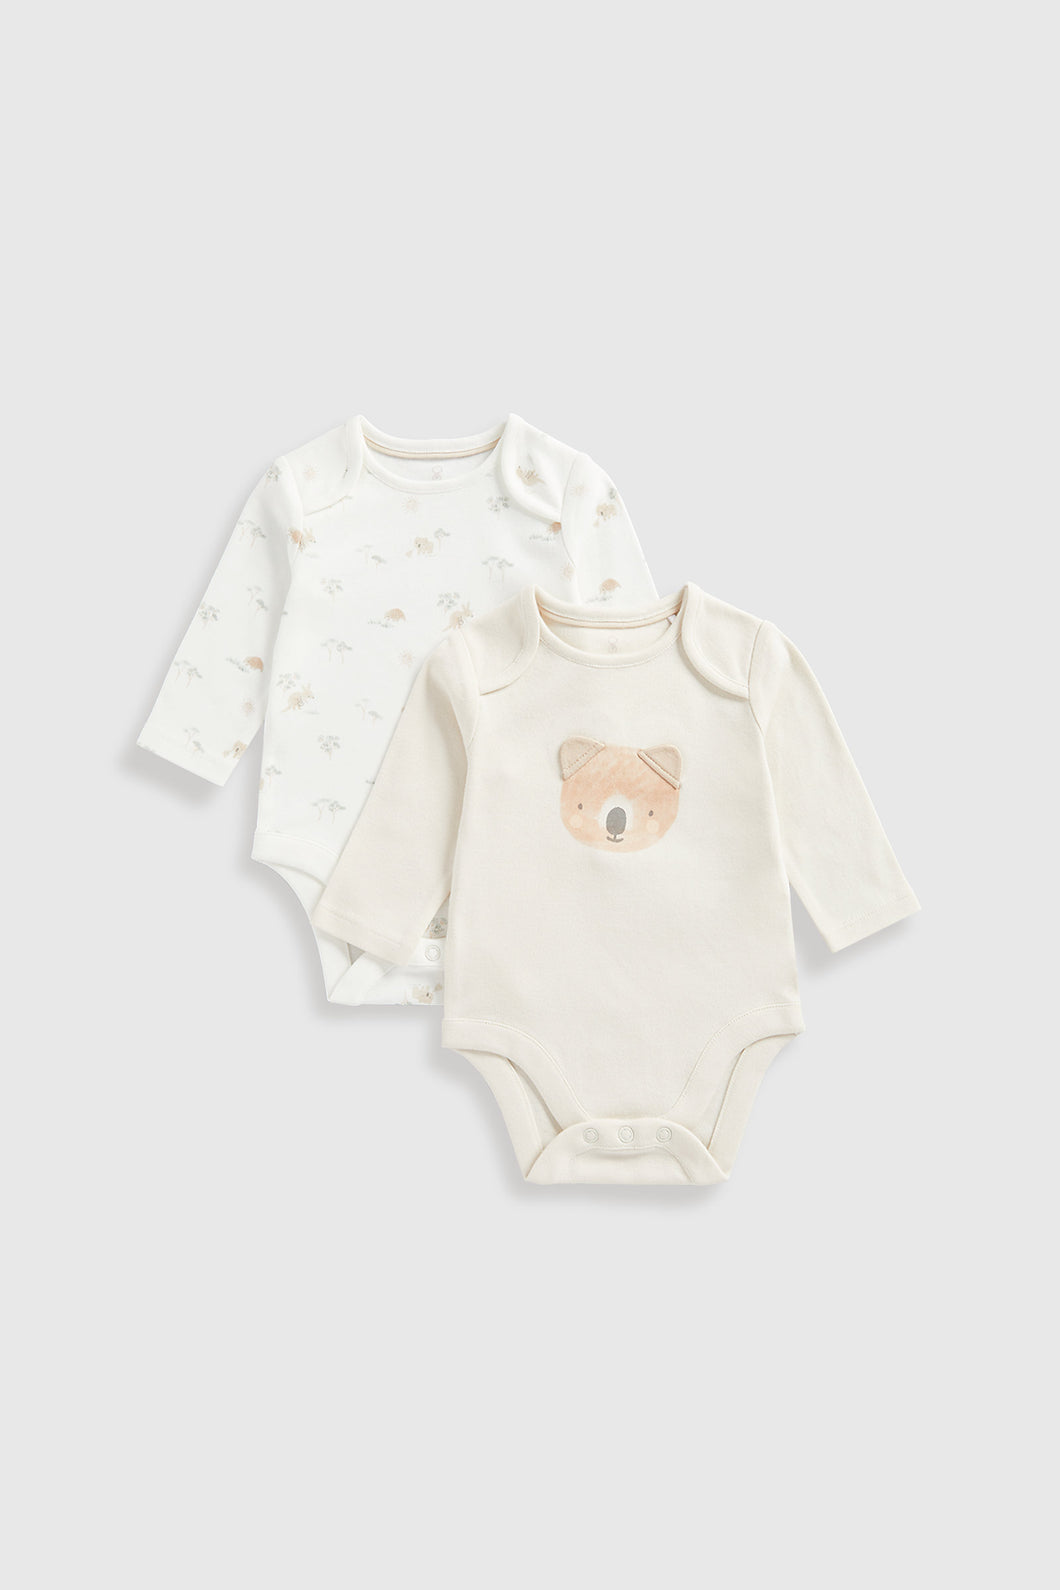 Mothercare My First Kangaroo Bodysuits - 2 Pack